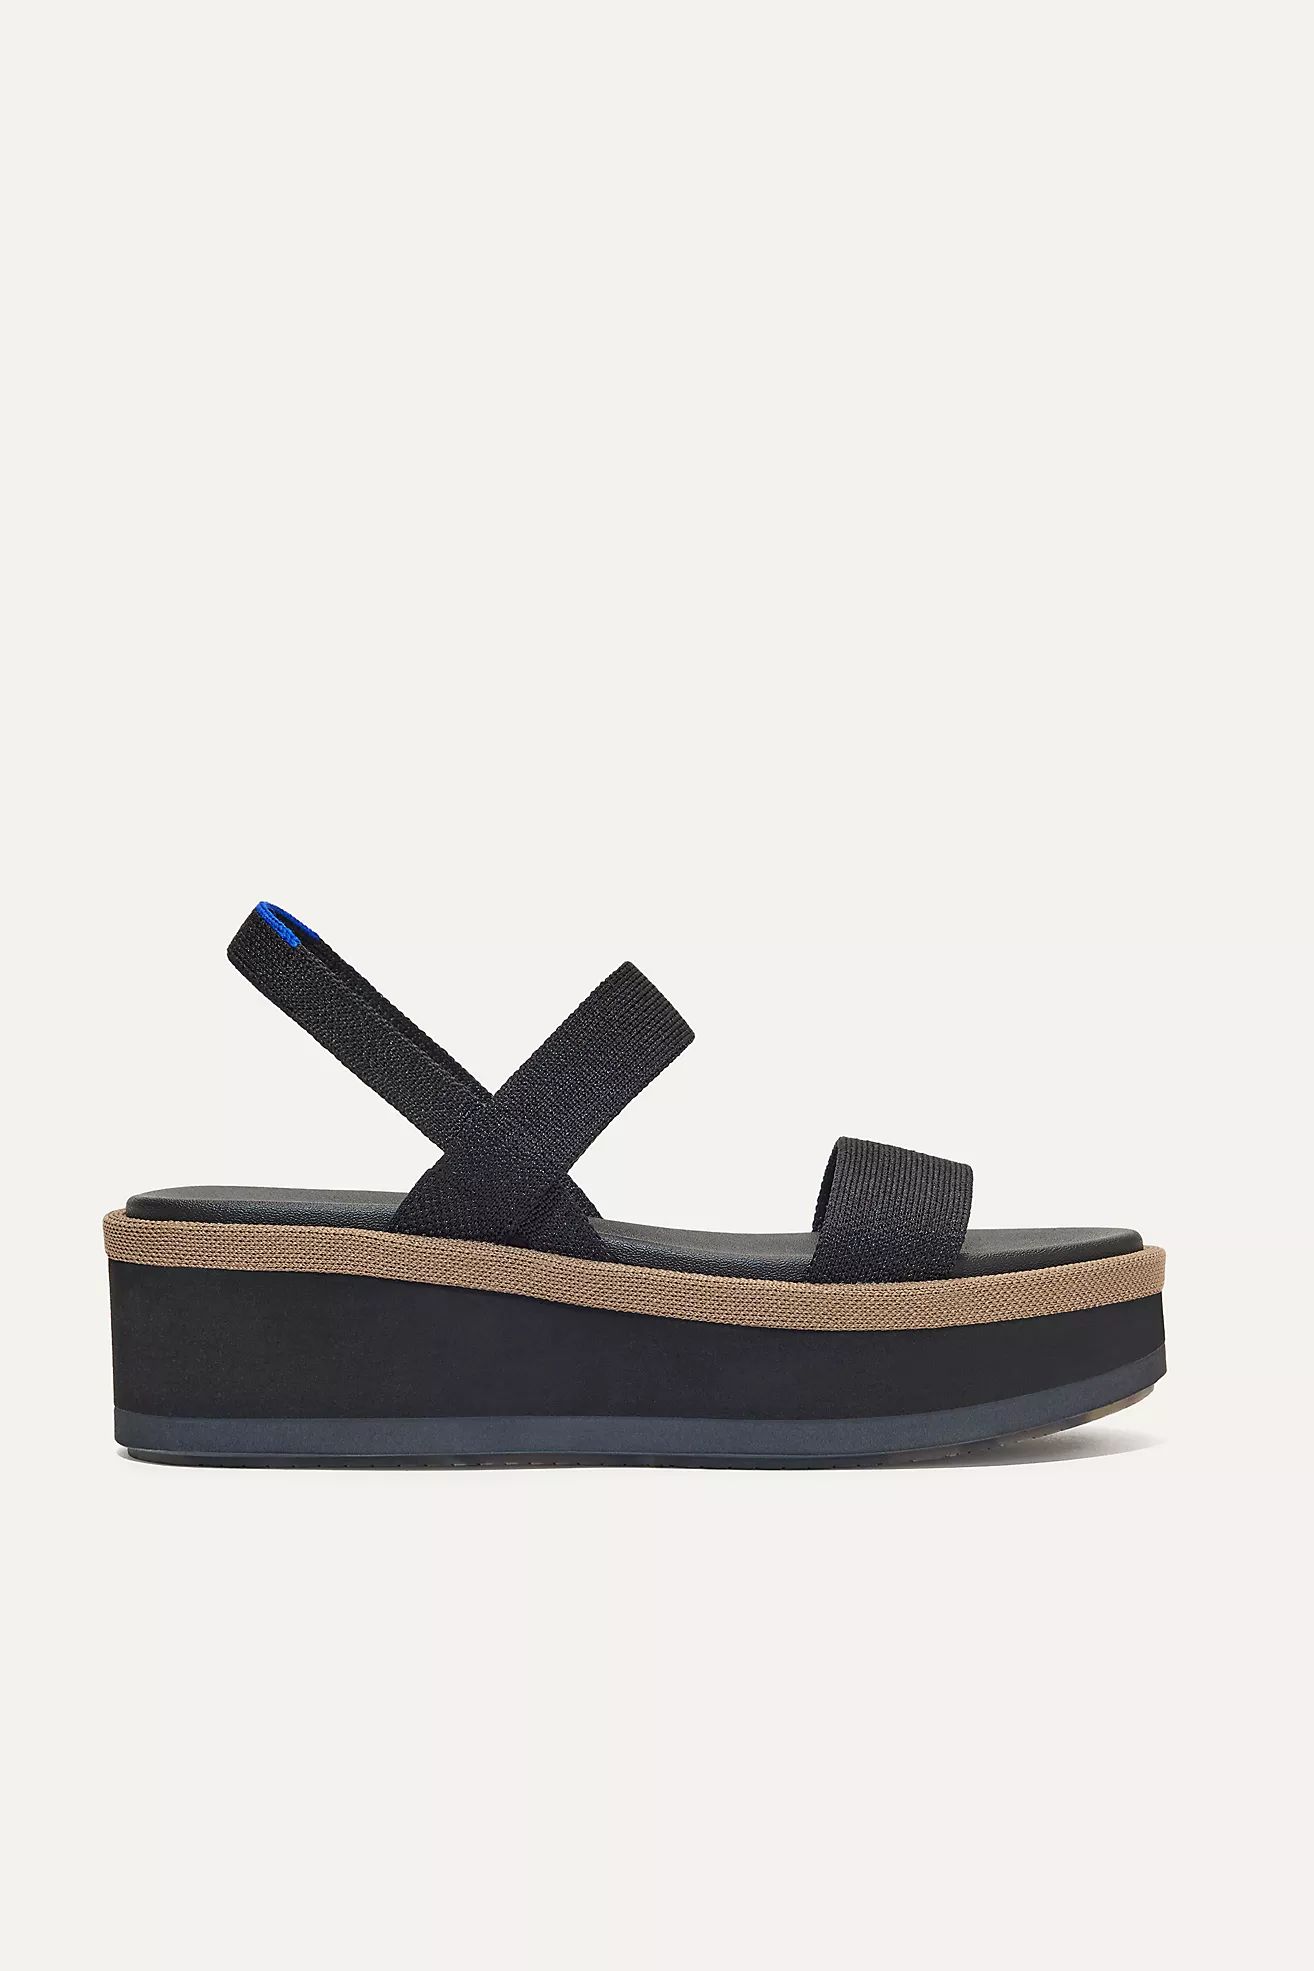 Rothy's The Wedge Sandals | Anthropologie (US)